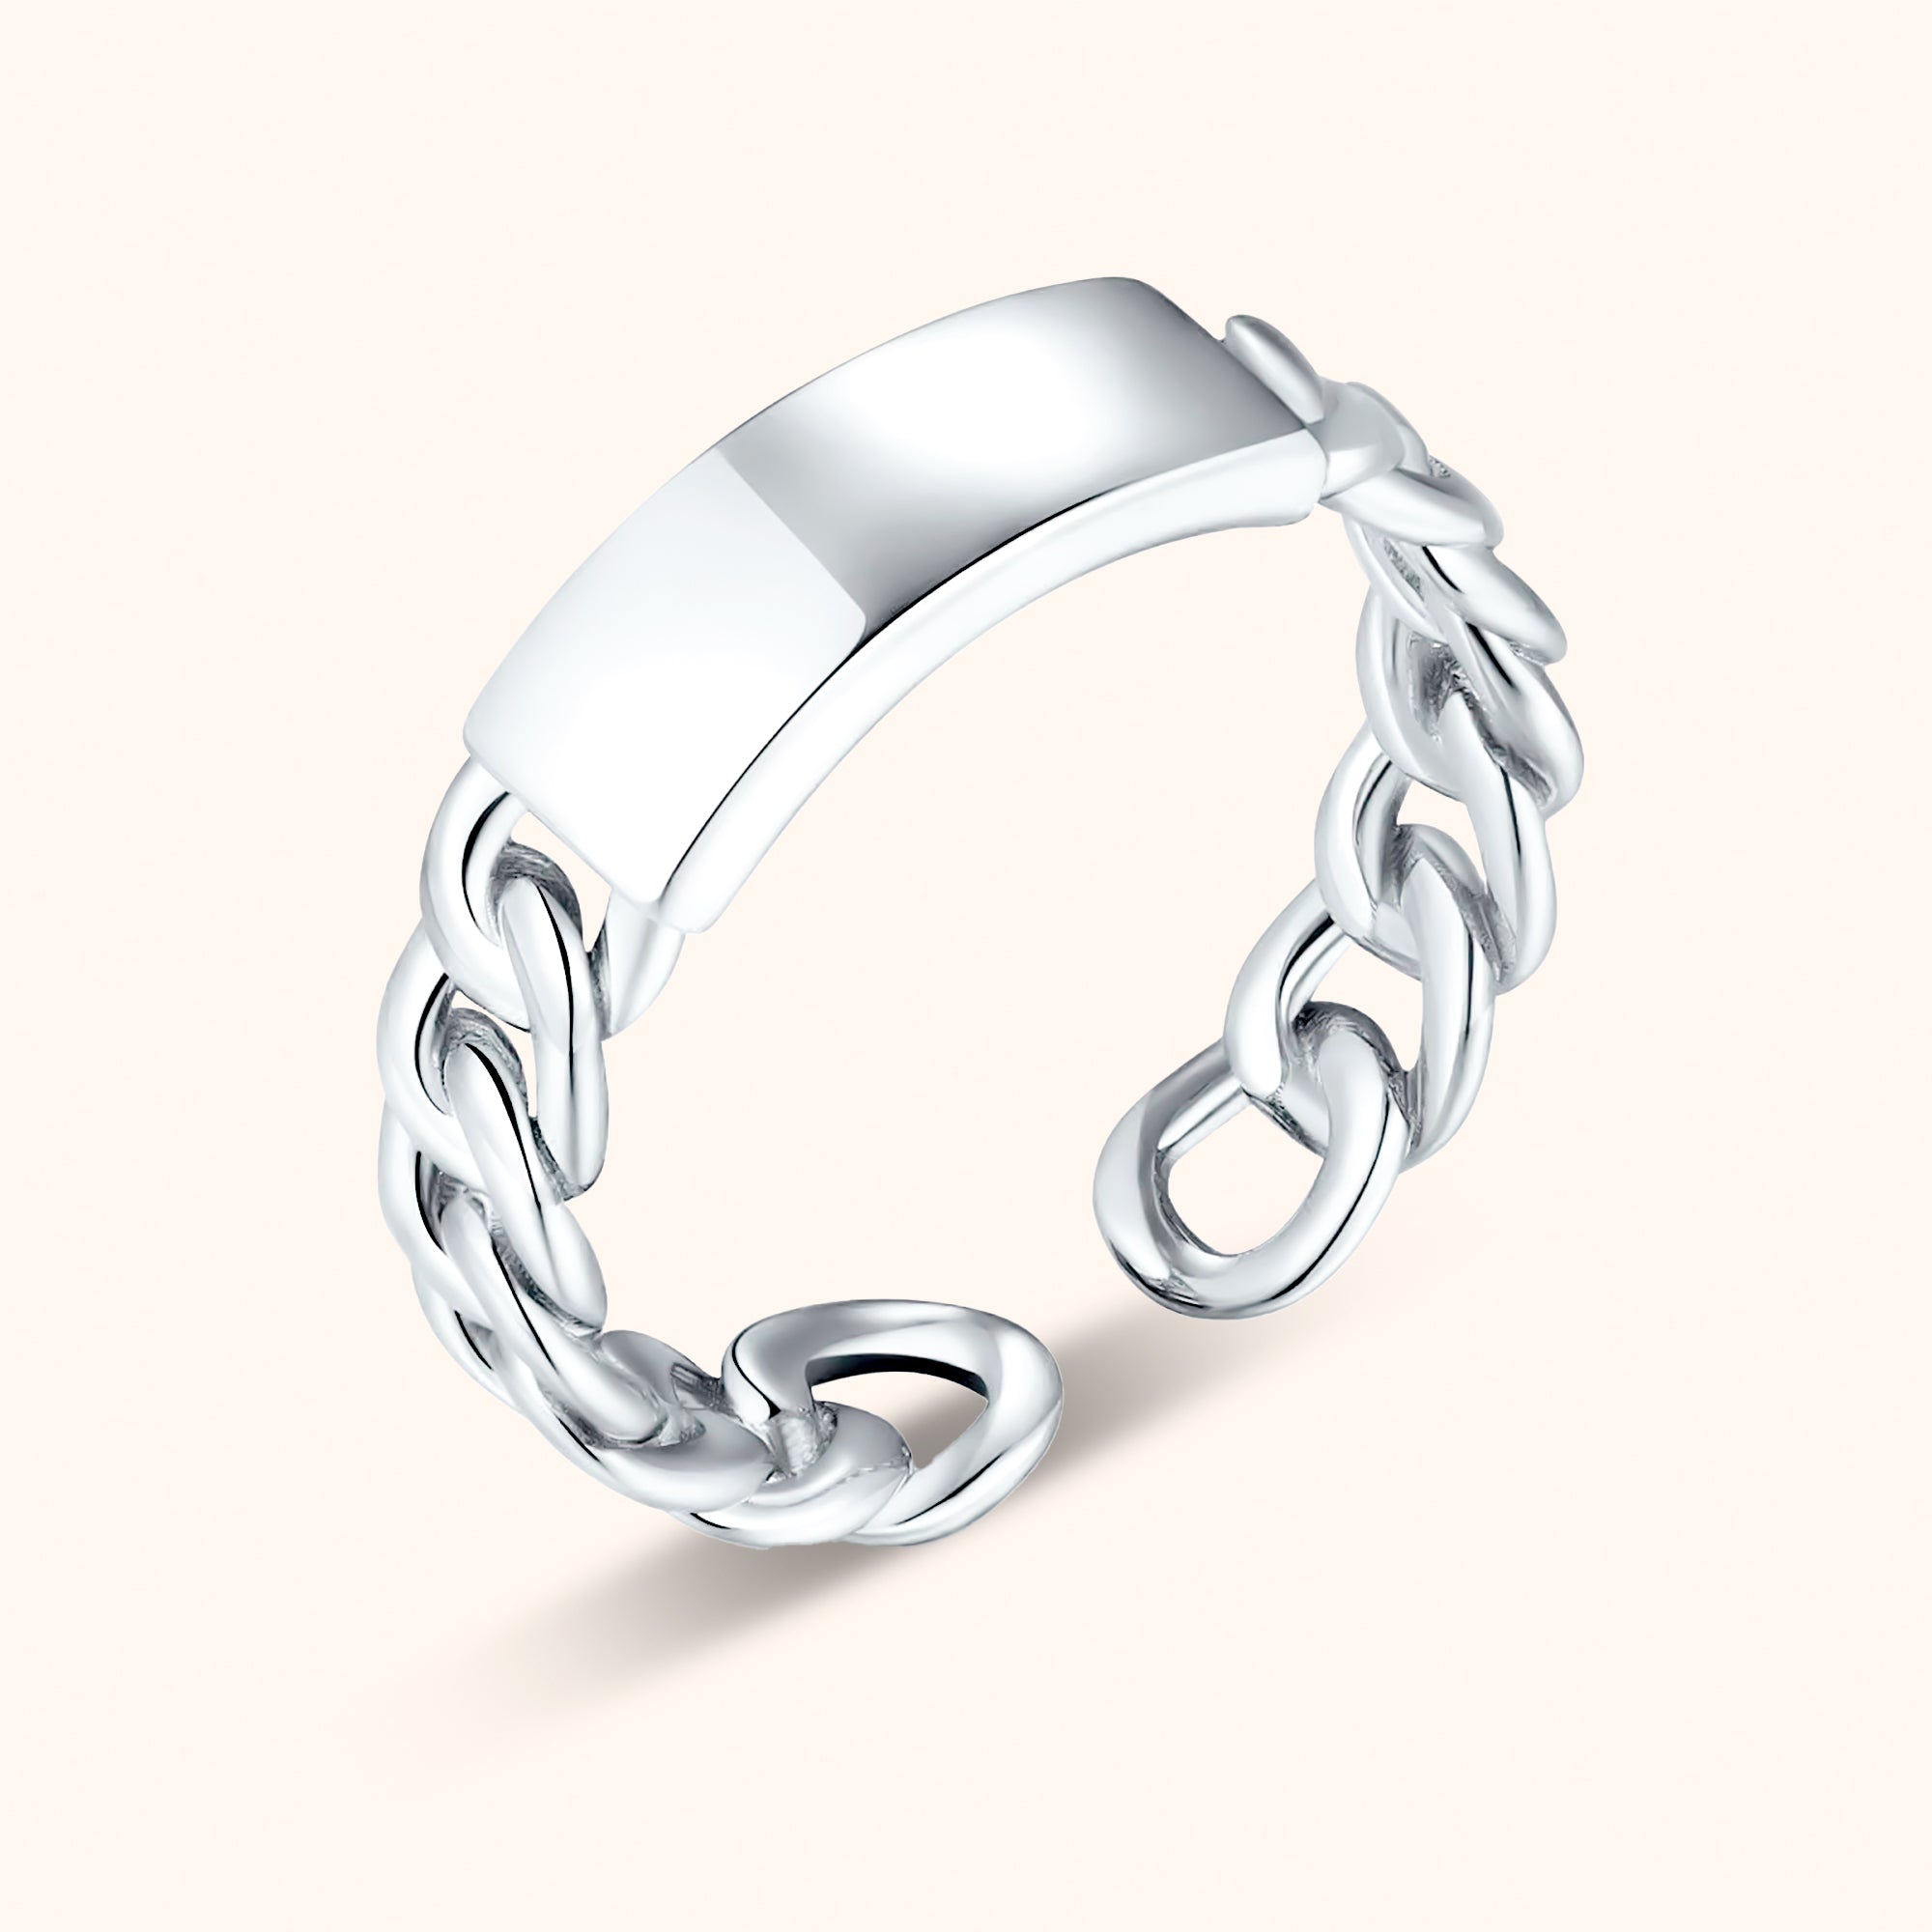 "Chains" Ring